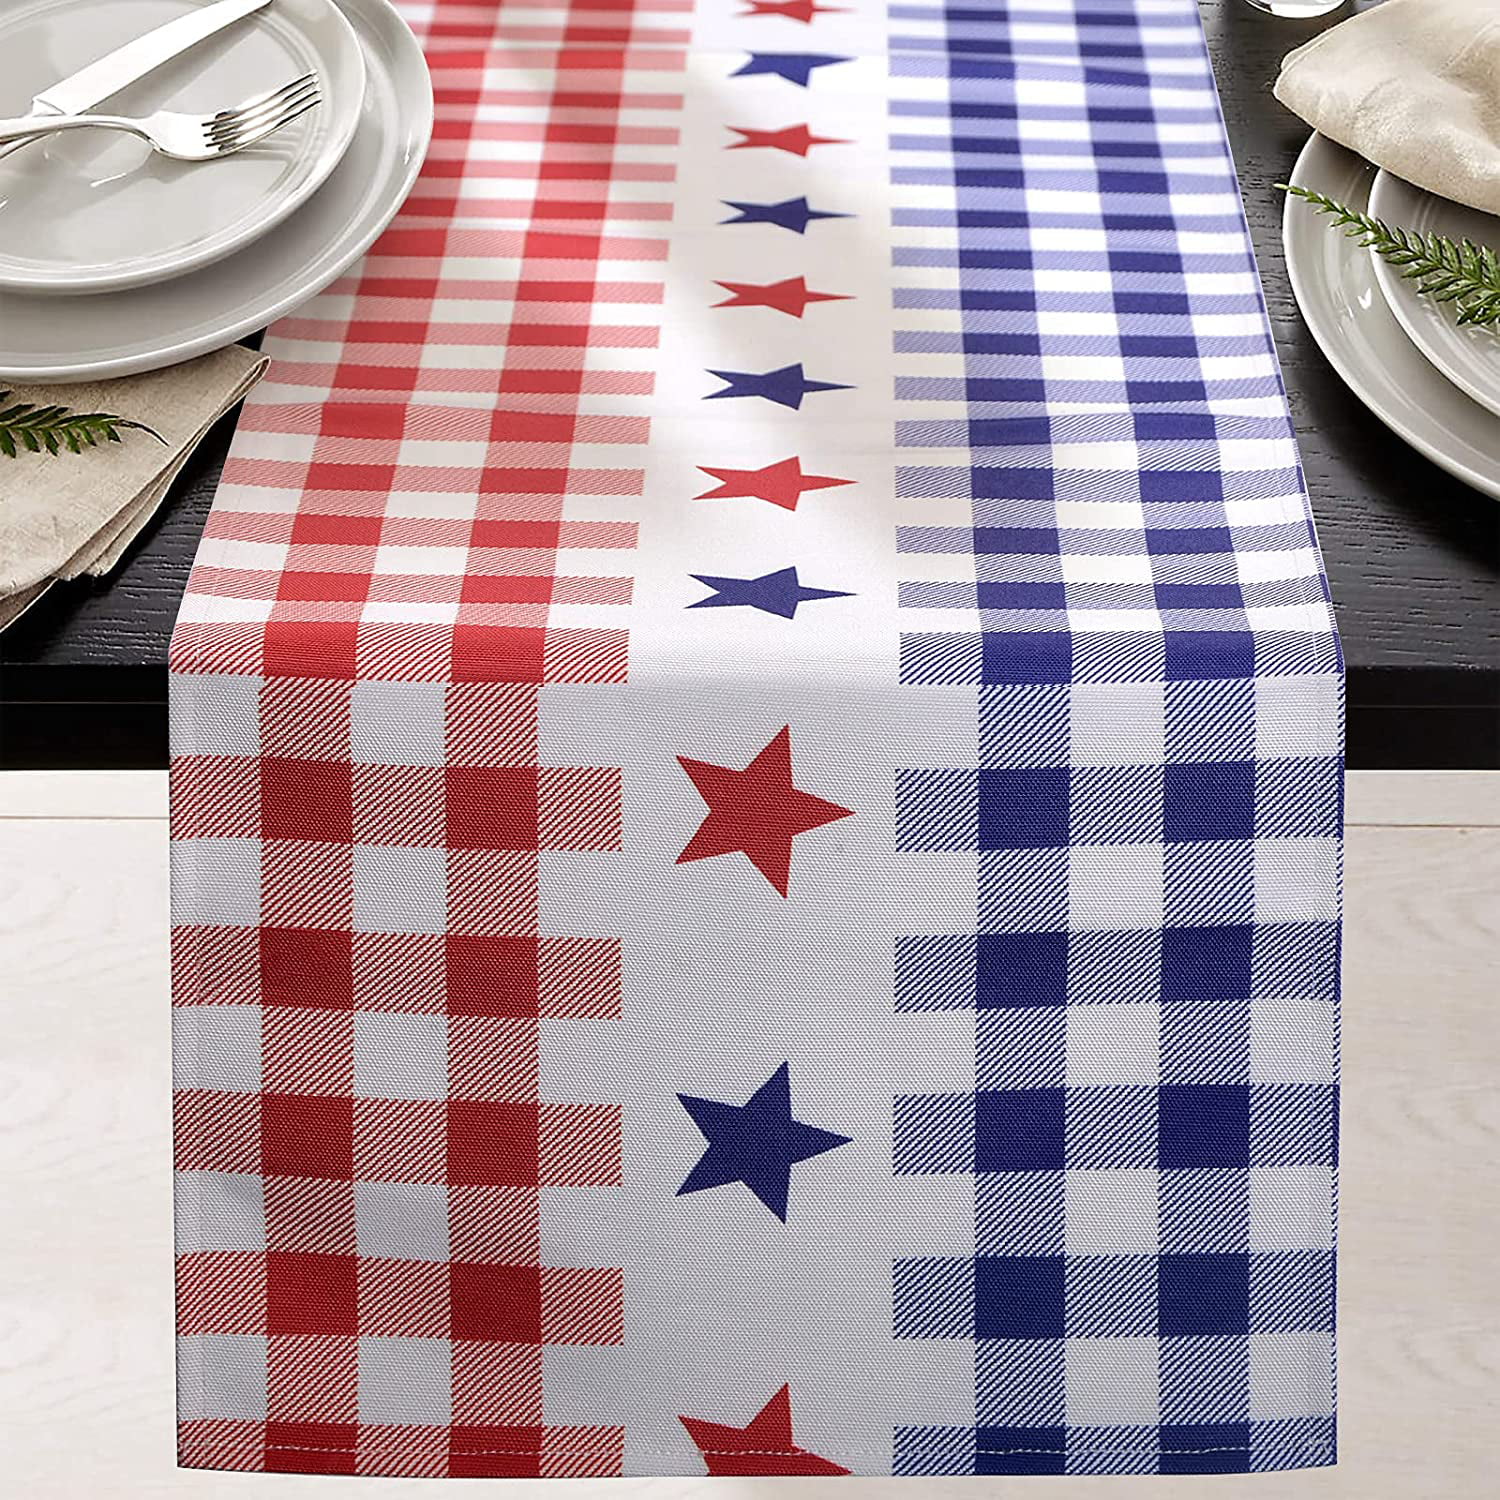 72 Inch Long Cotton Fabric with Blue and White Stars for American USA Independence Day Memorial Day 4th of July Decor tiosggd Patriotic Table Runner